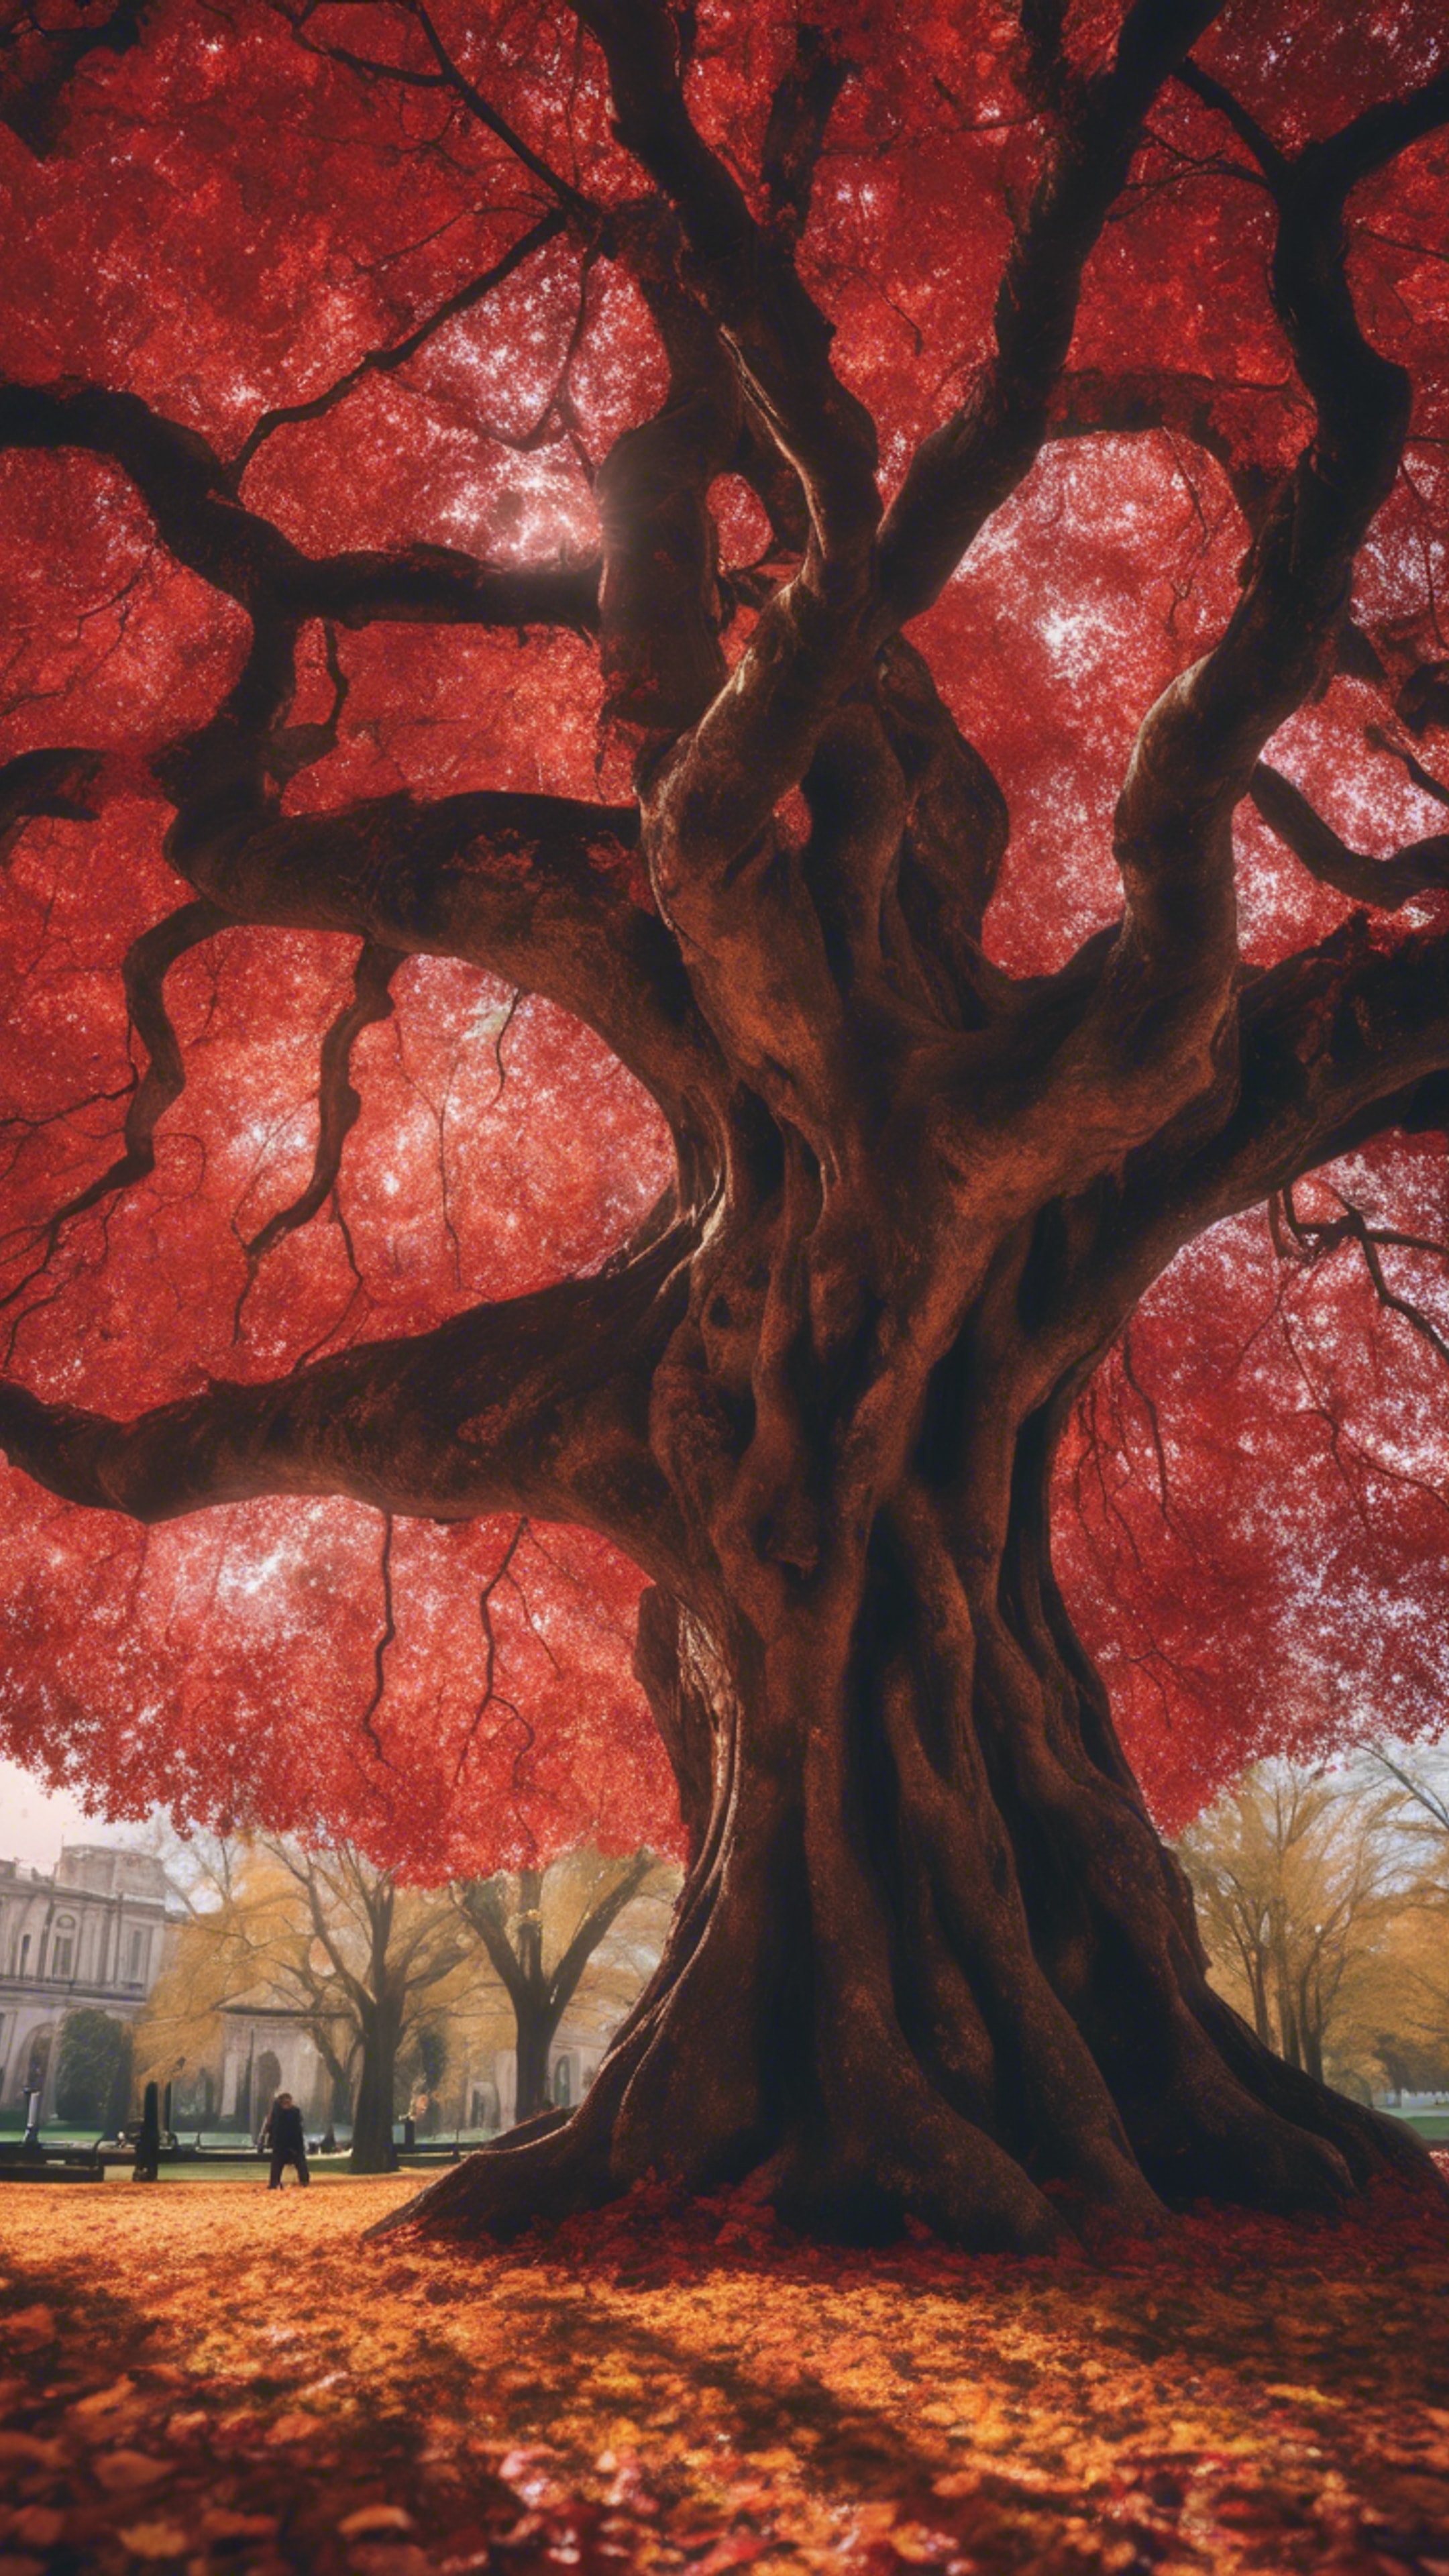 Crimson and gold leaves swirling around a majestic Gothic tree that stands as a sentinel in a tranquil park. Wallpaper[aba517022bf4436e9436]